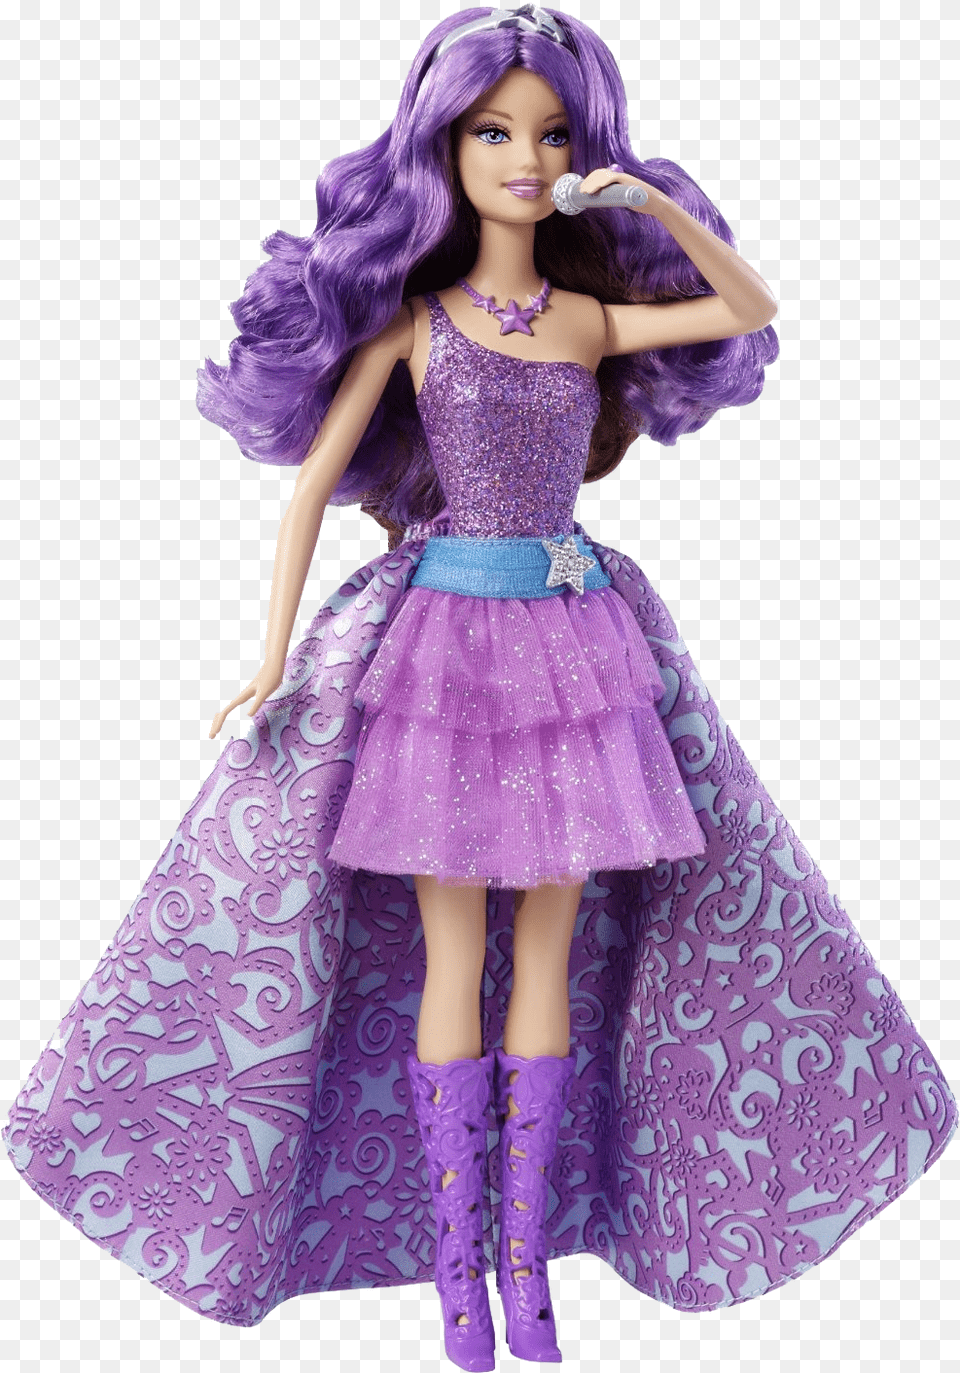 Barbie Doll Pic, Toy, Figurine, Female, Child Png Image